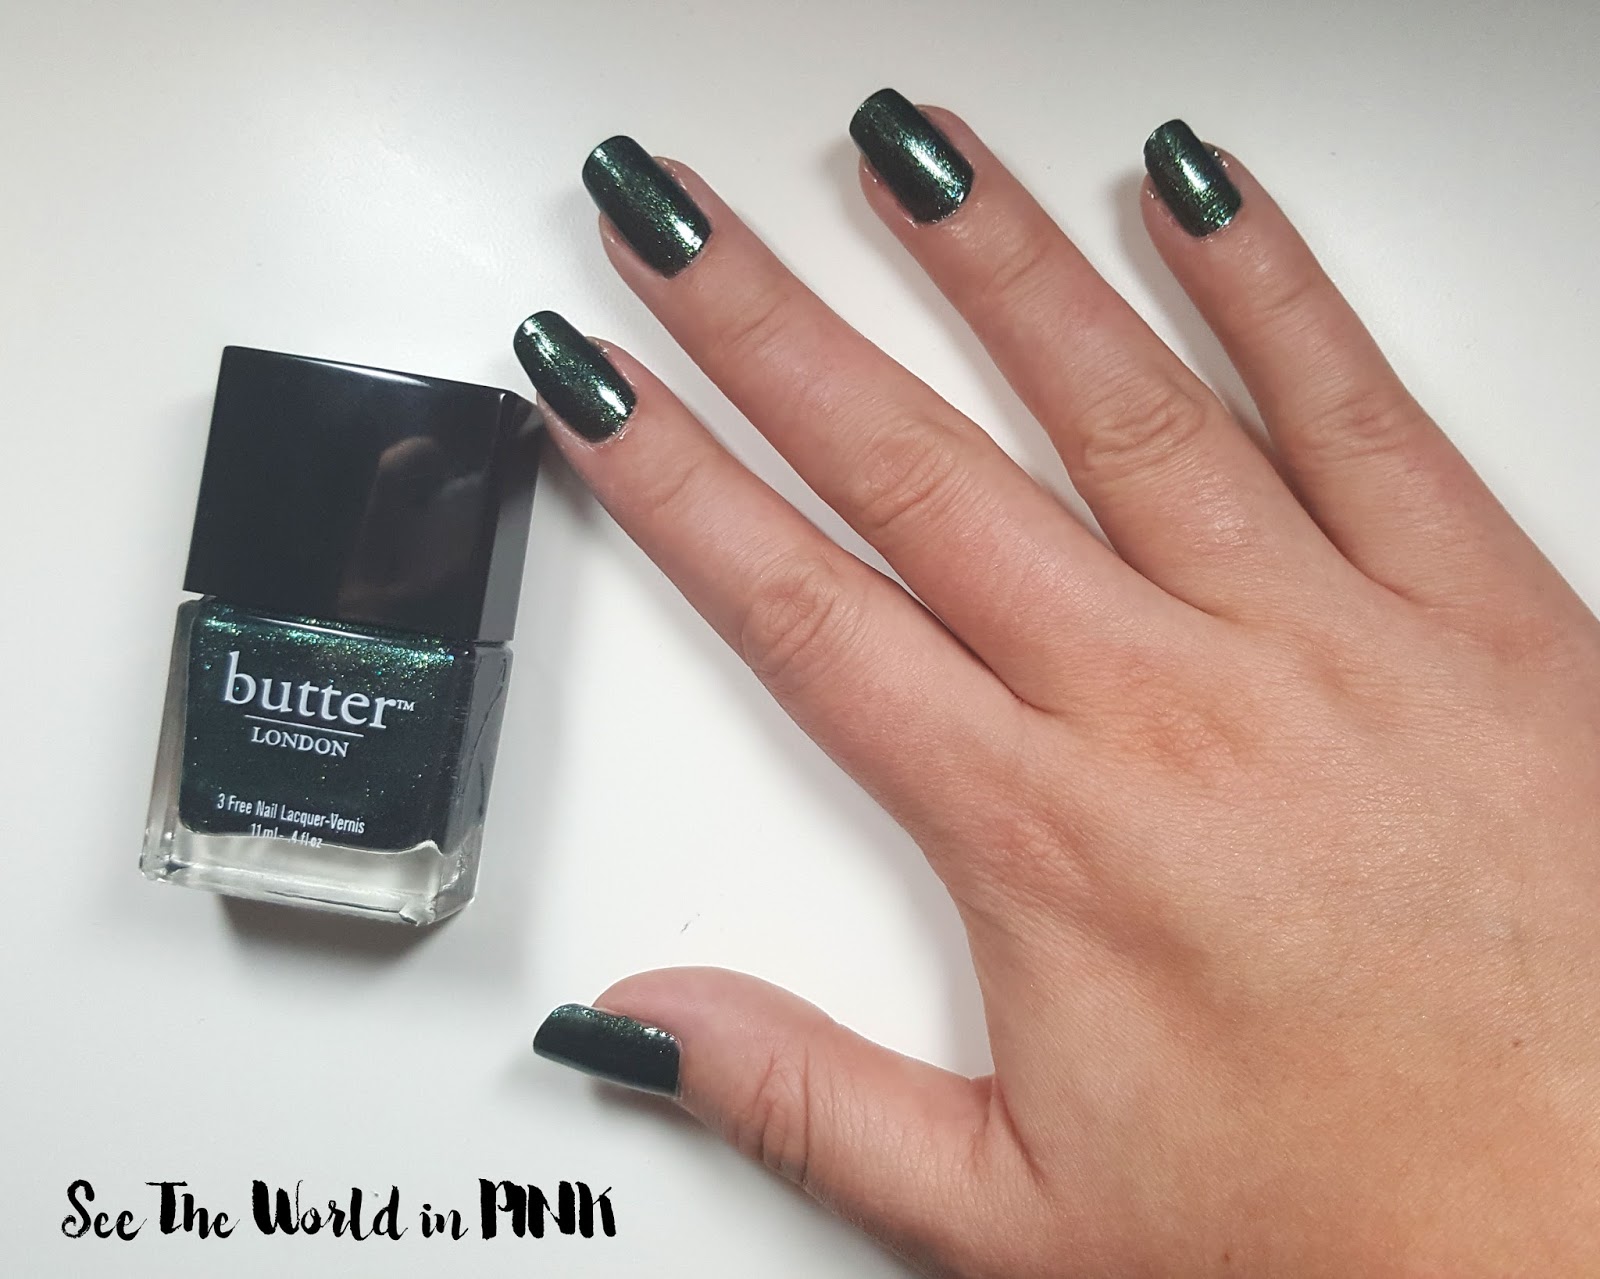 Glittery Green Manicure Tuesday - "Jack The Lad" Butter London polish